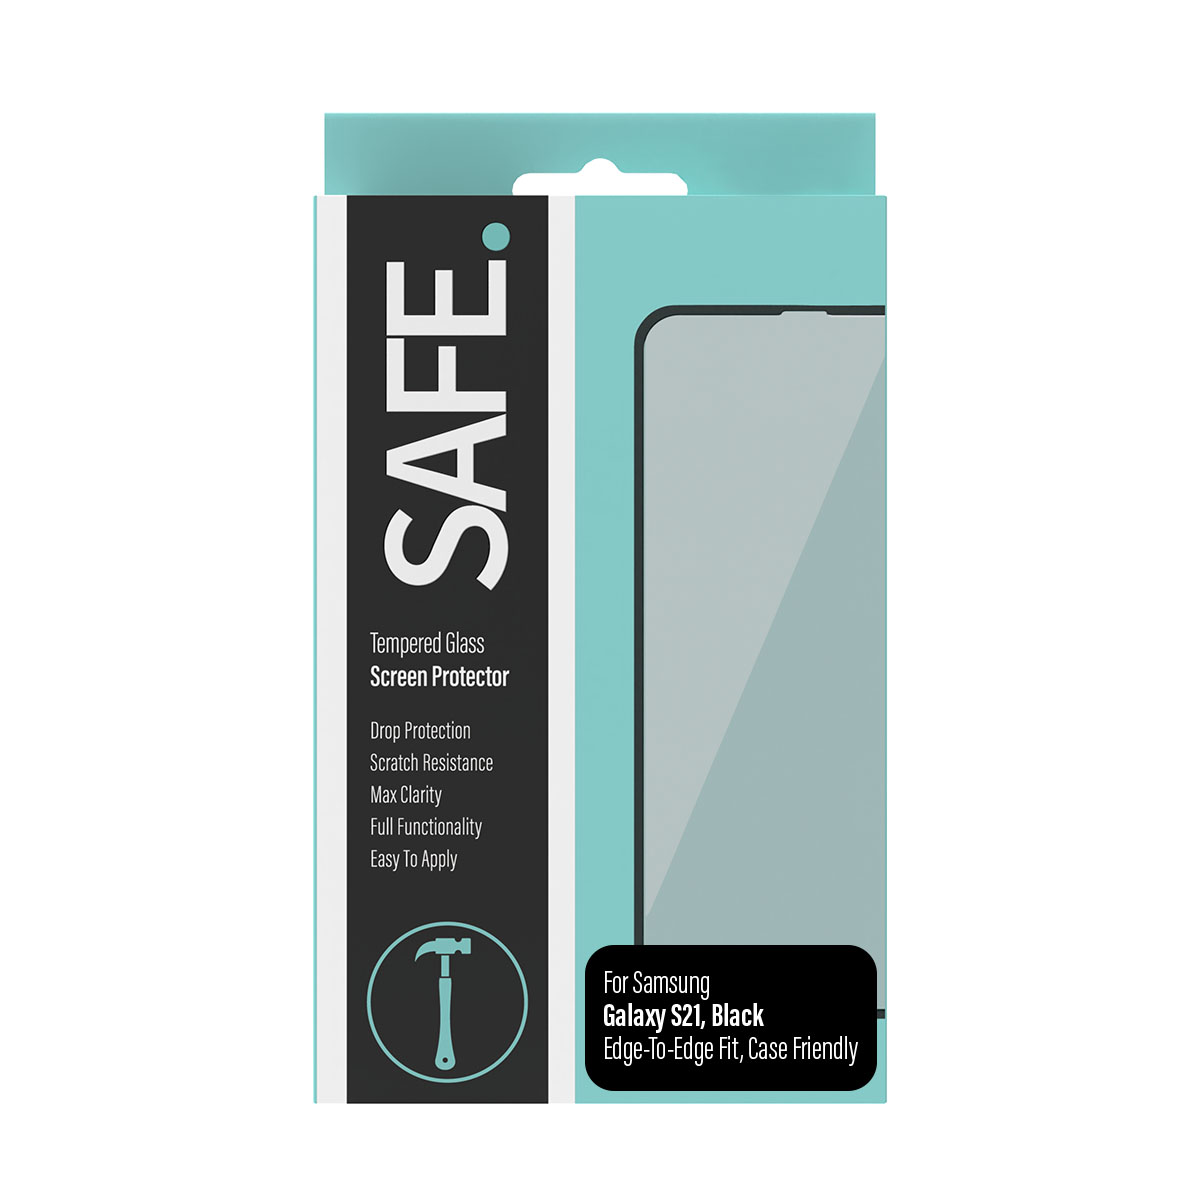 SAFE Samsung Galaxy S21 - Screen Protector - Drop Protective, Scratch Resistance, Max Clarity